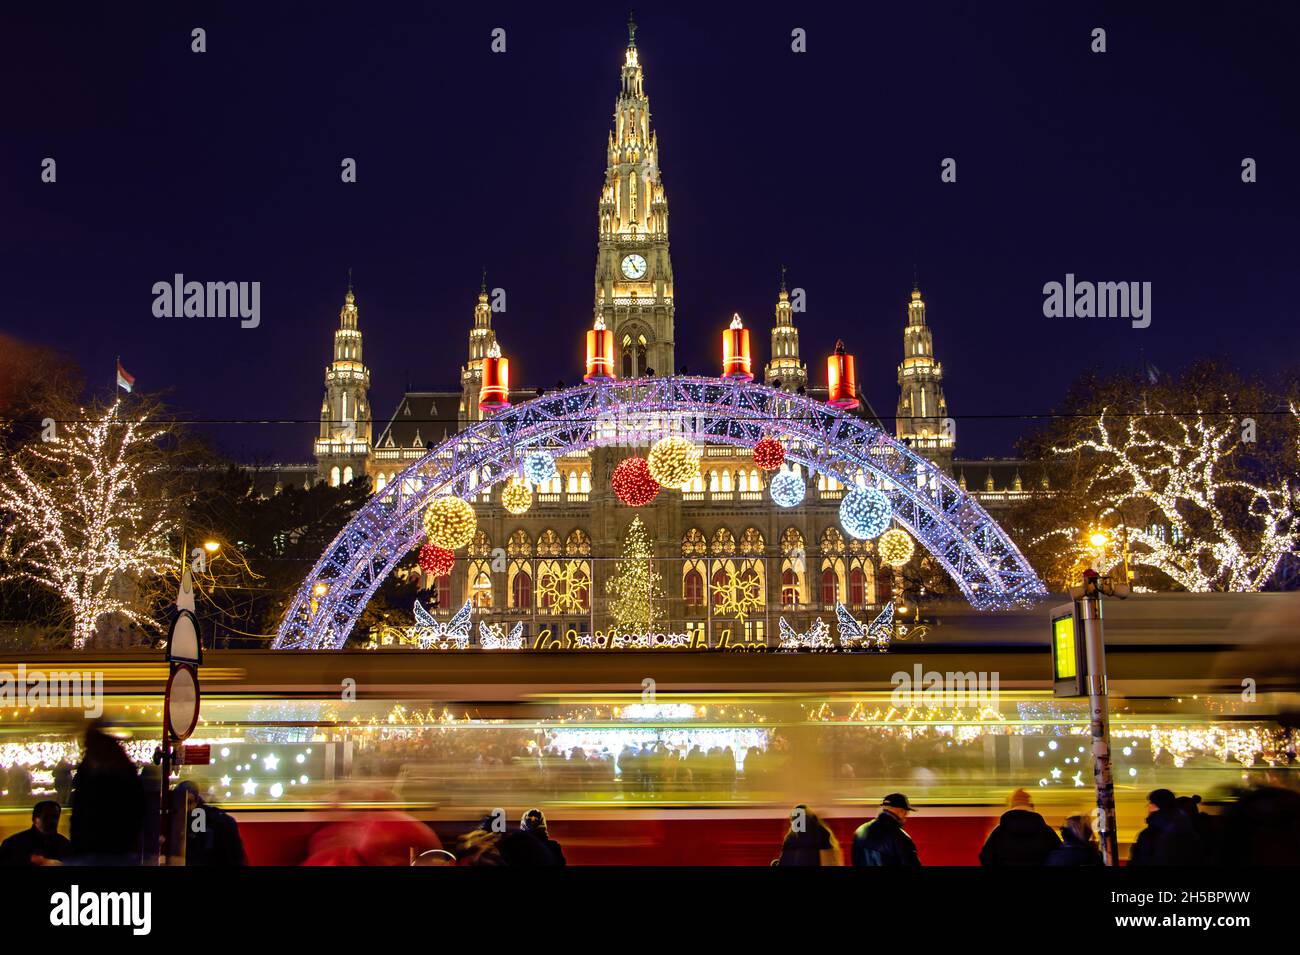 The tram is ride in front of the Christmas market by City hall -  Rathaus in night Vienna, Austria. Stock Photo